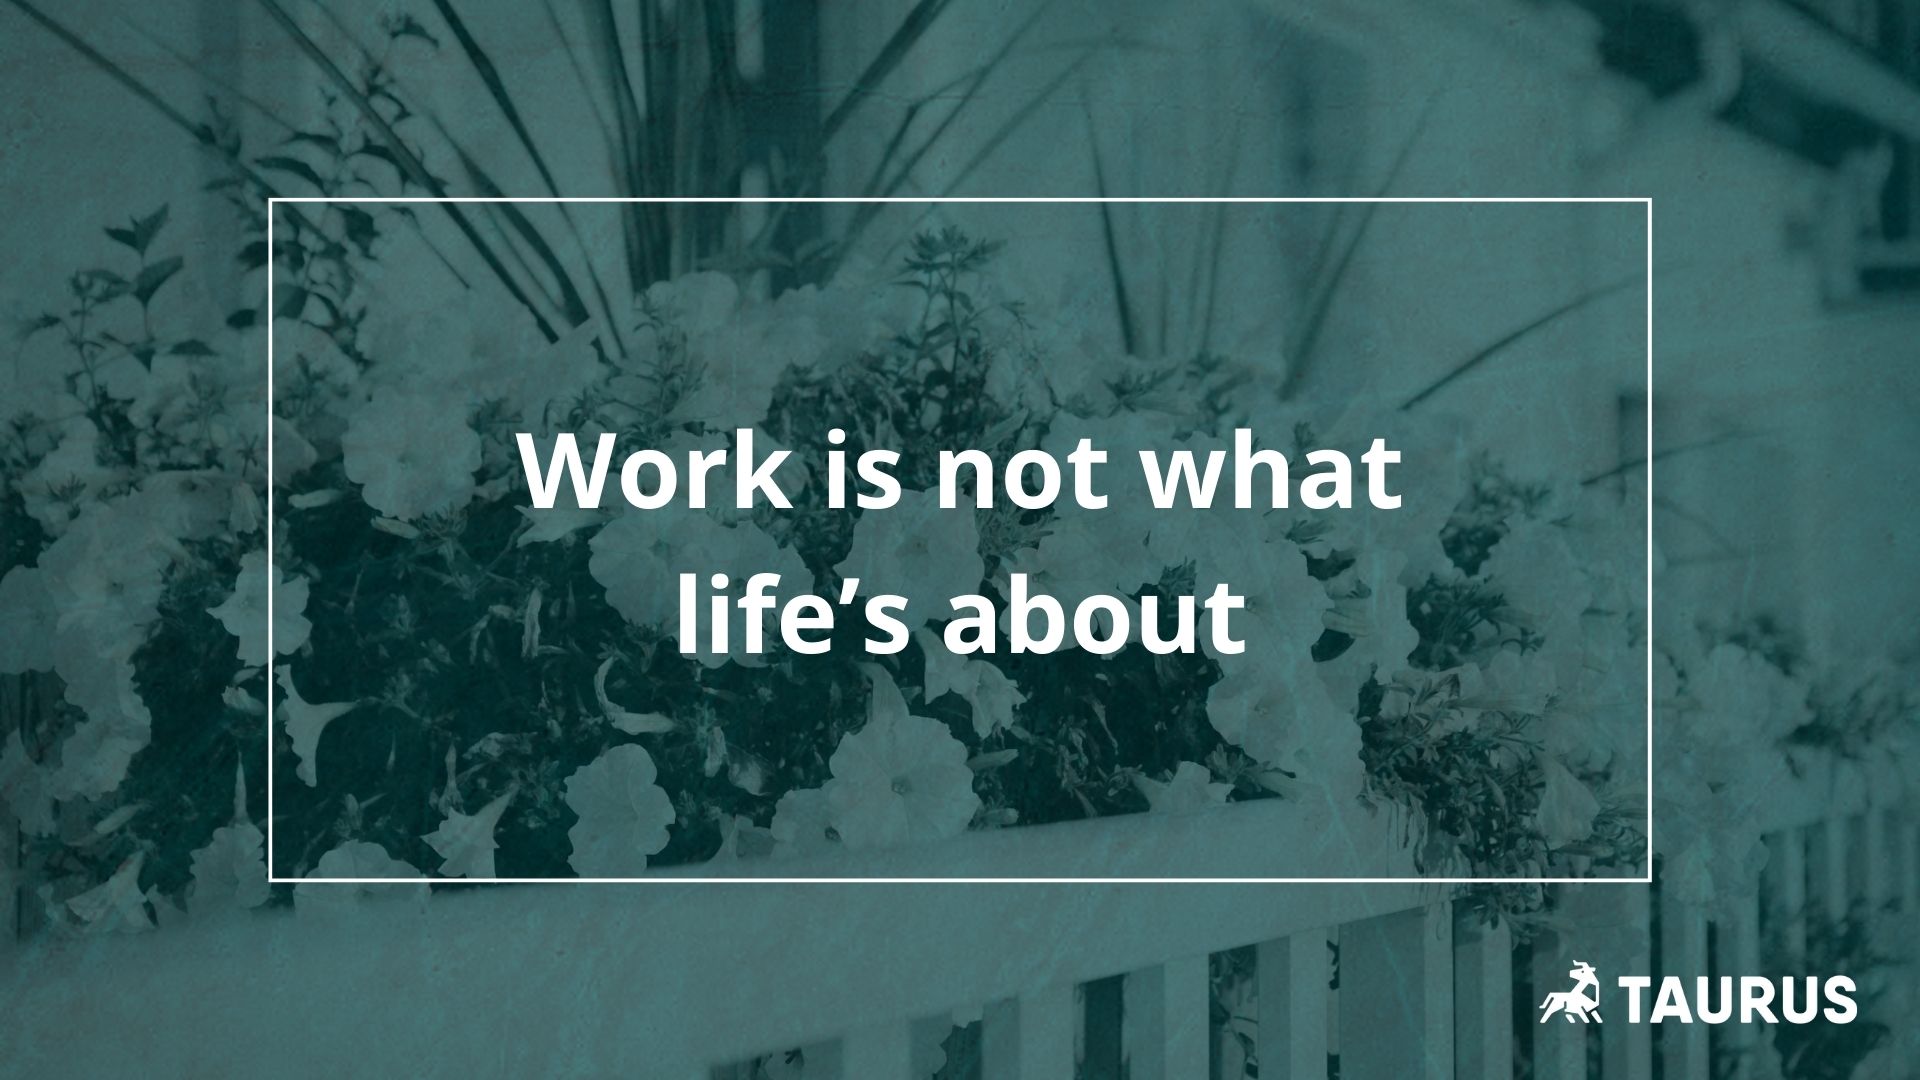 You are currently viewing Work is not what life’s about